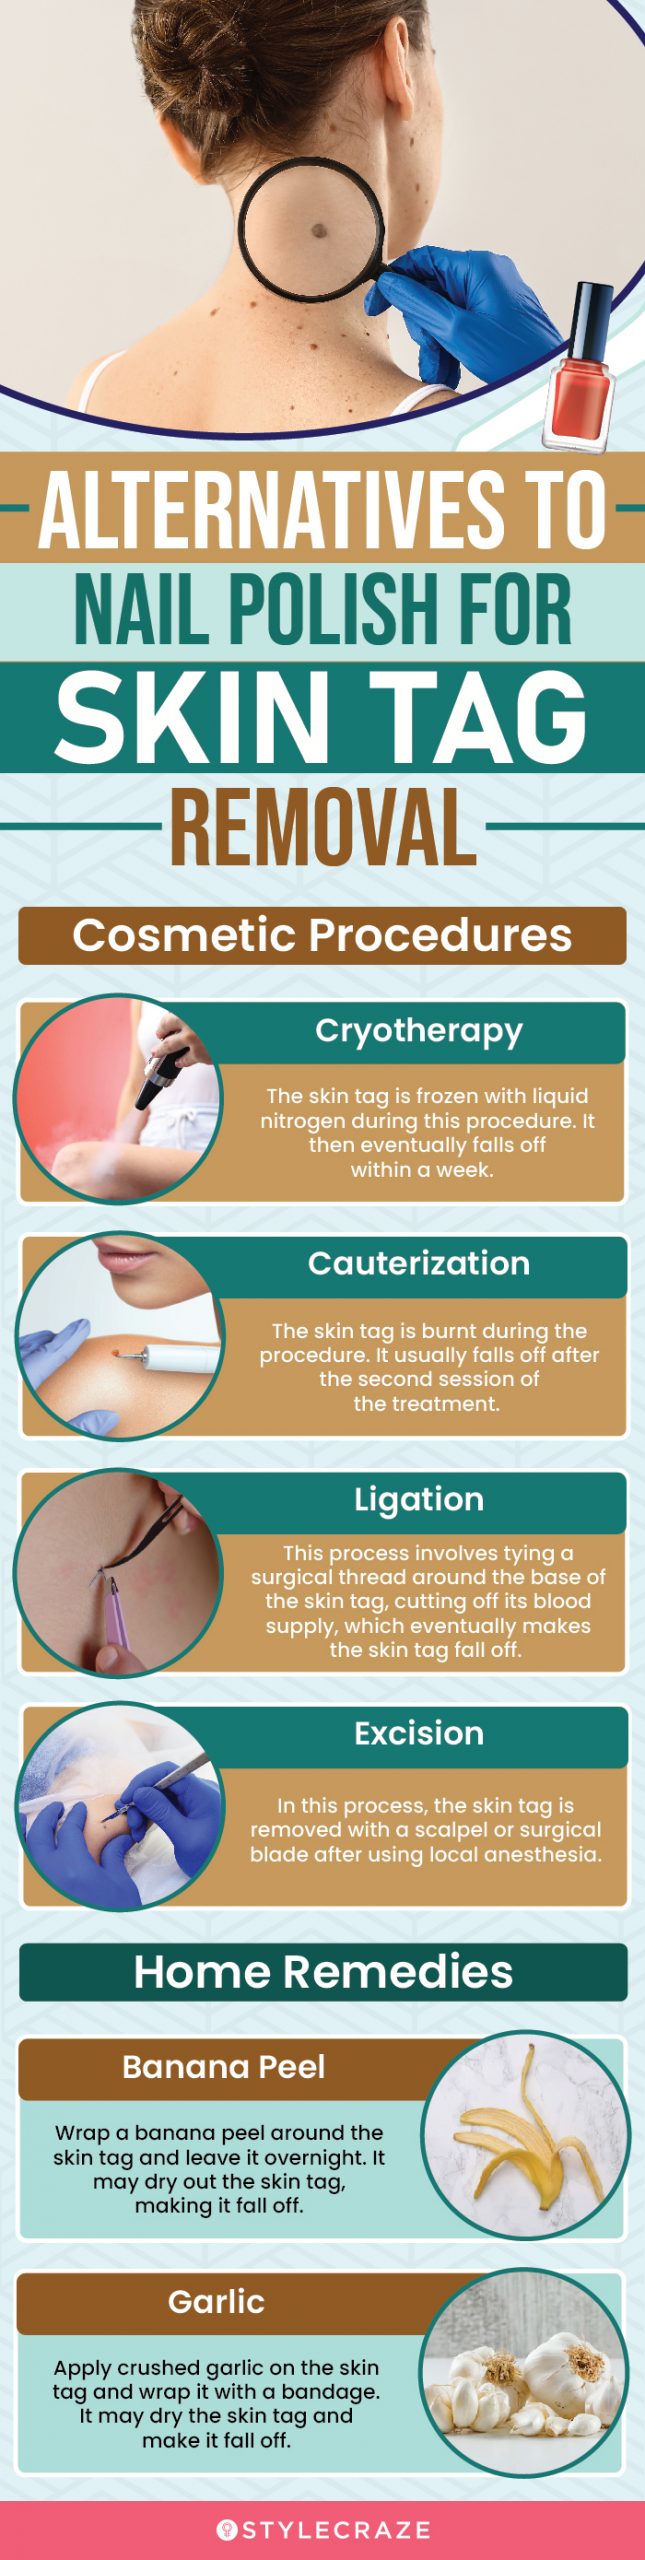 alternatives to nail polish for skin tag removal (infographic)